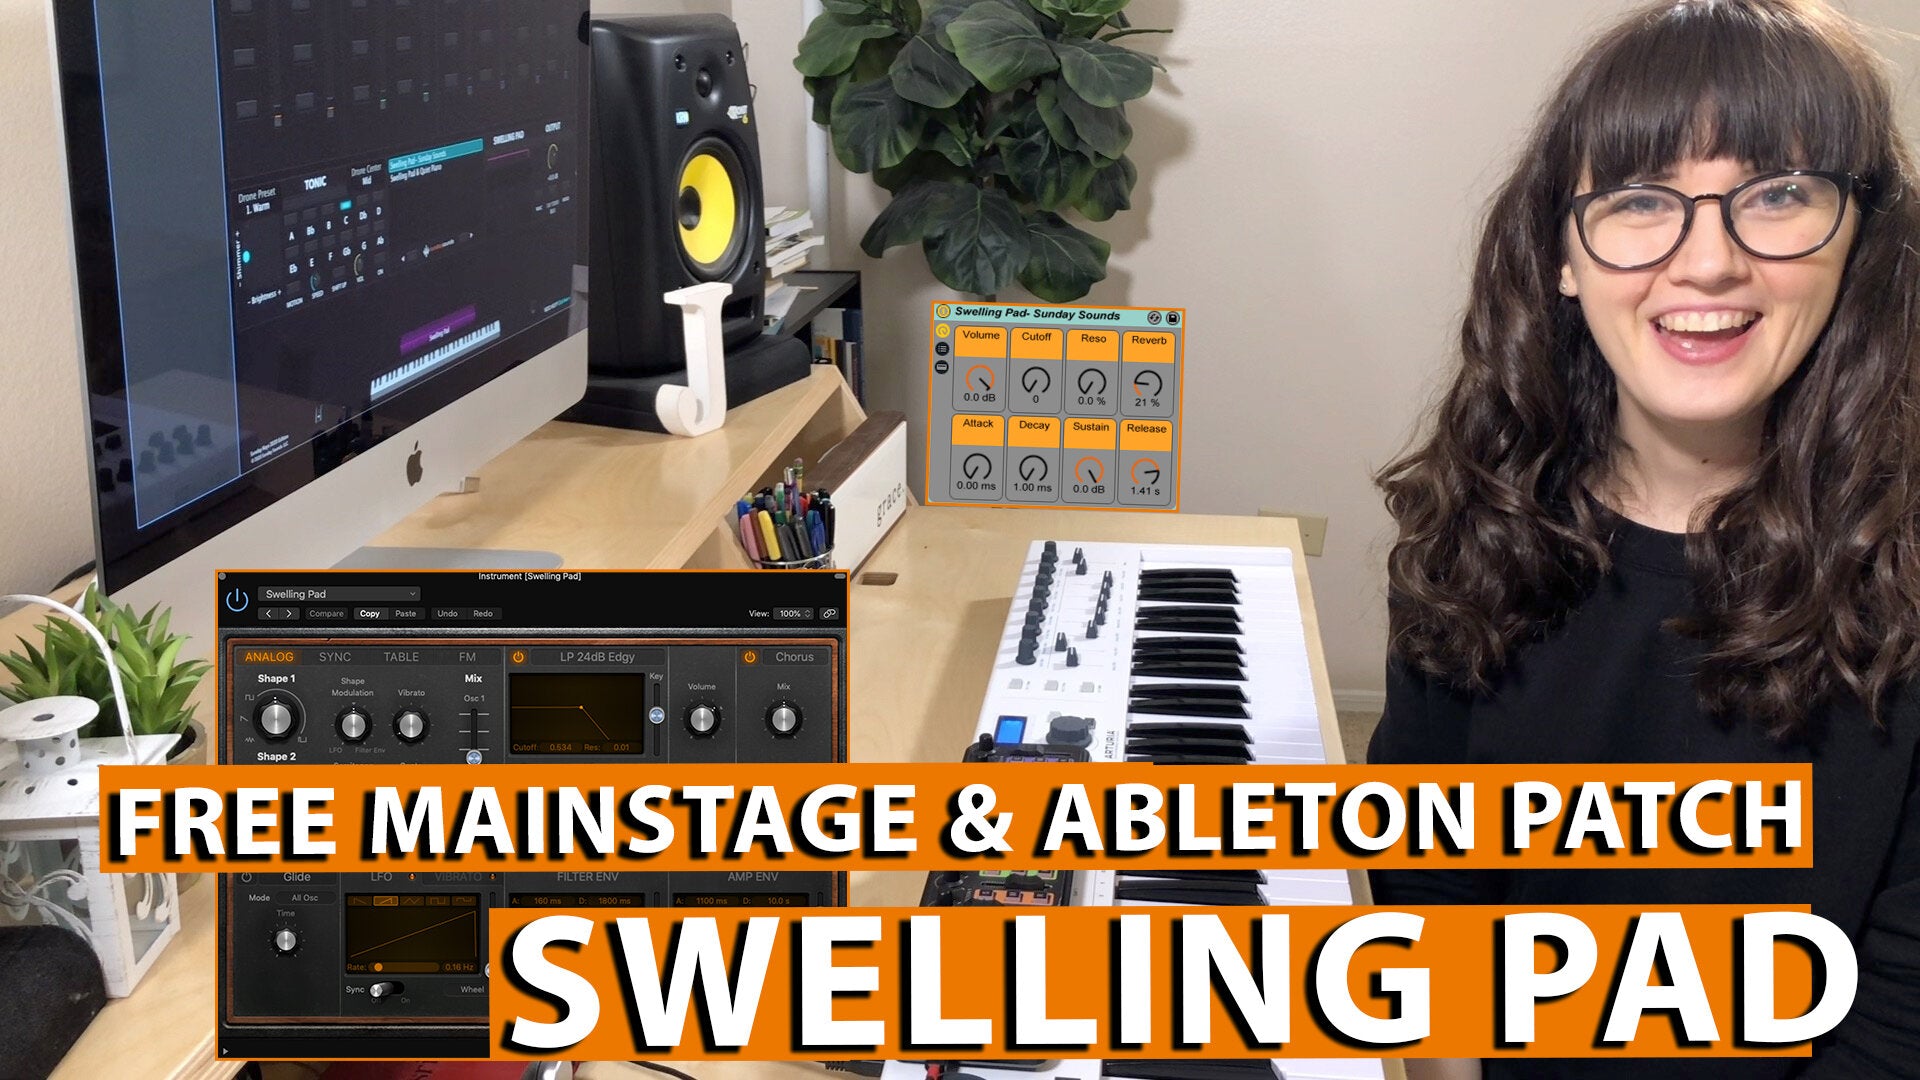 Free MainStage & Ableton Worship Patch! - Swelling Pad